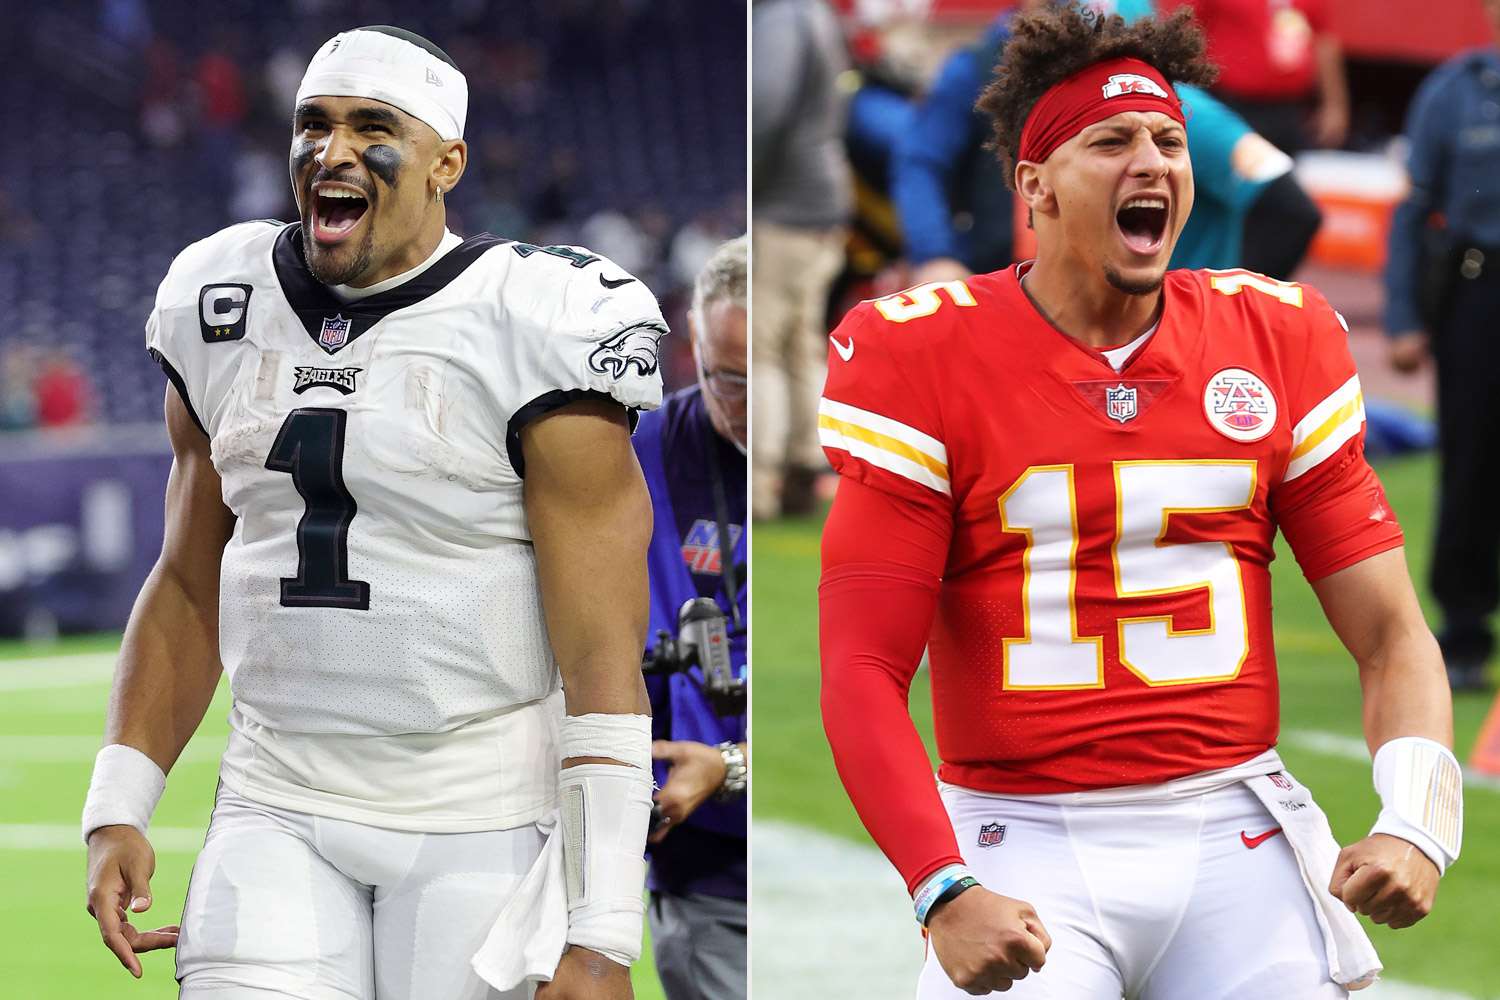 Patrick Mahomes vs Jalen Hurts in the Super Bowl - The Ballers Bank